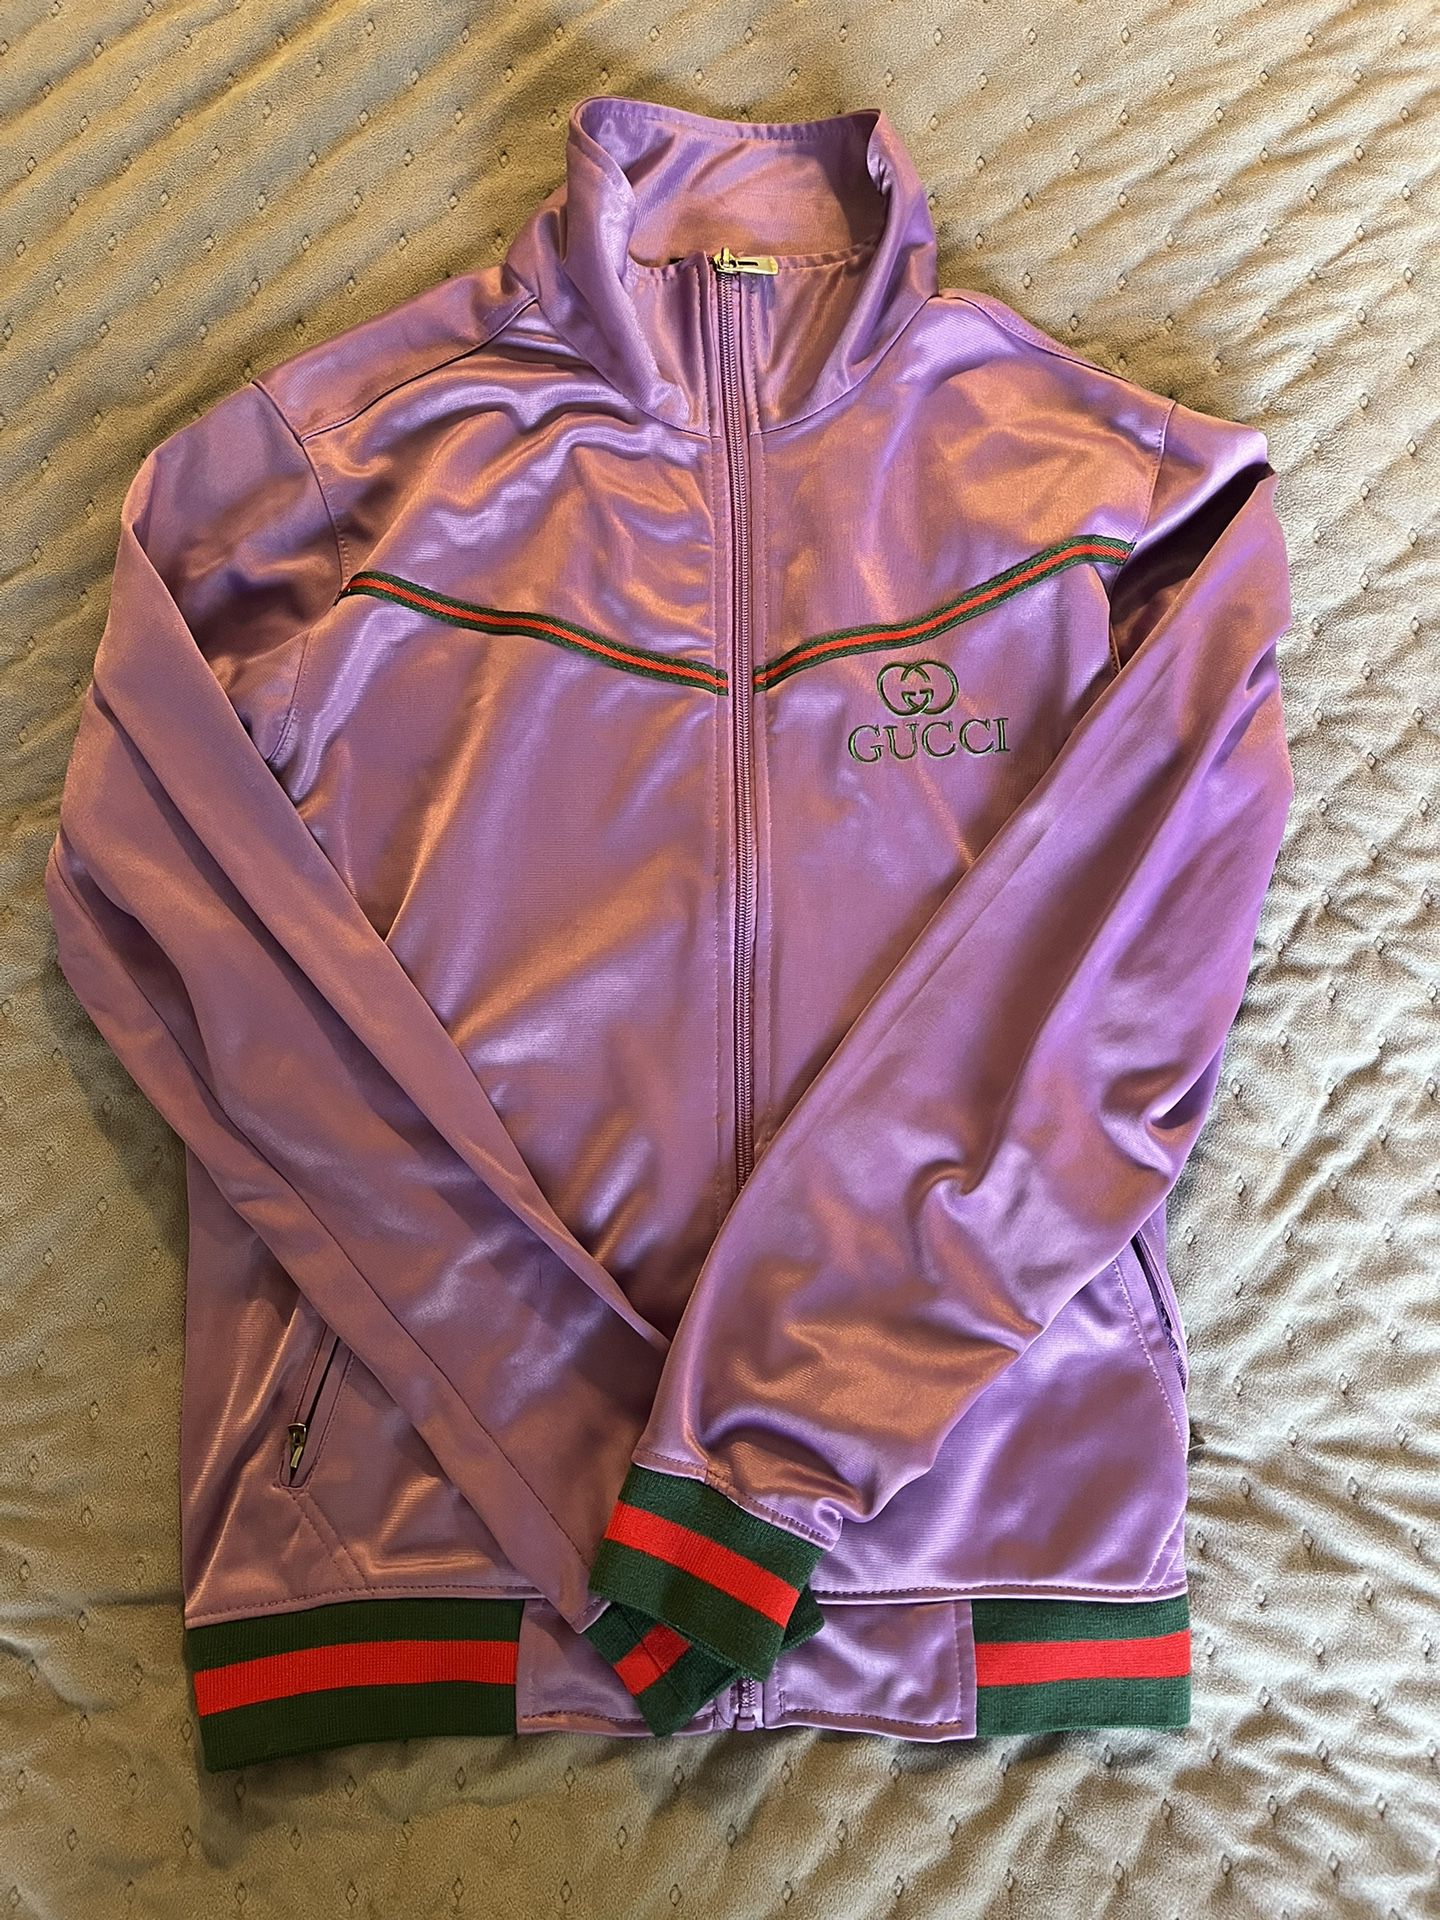 Gucci SweatSuit for Sale in Fremont, CA - OfferUp